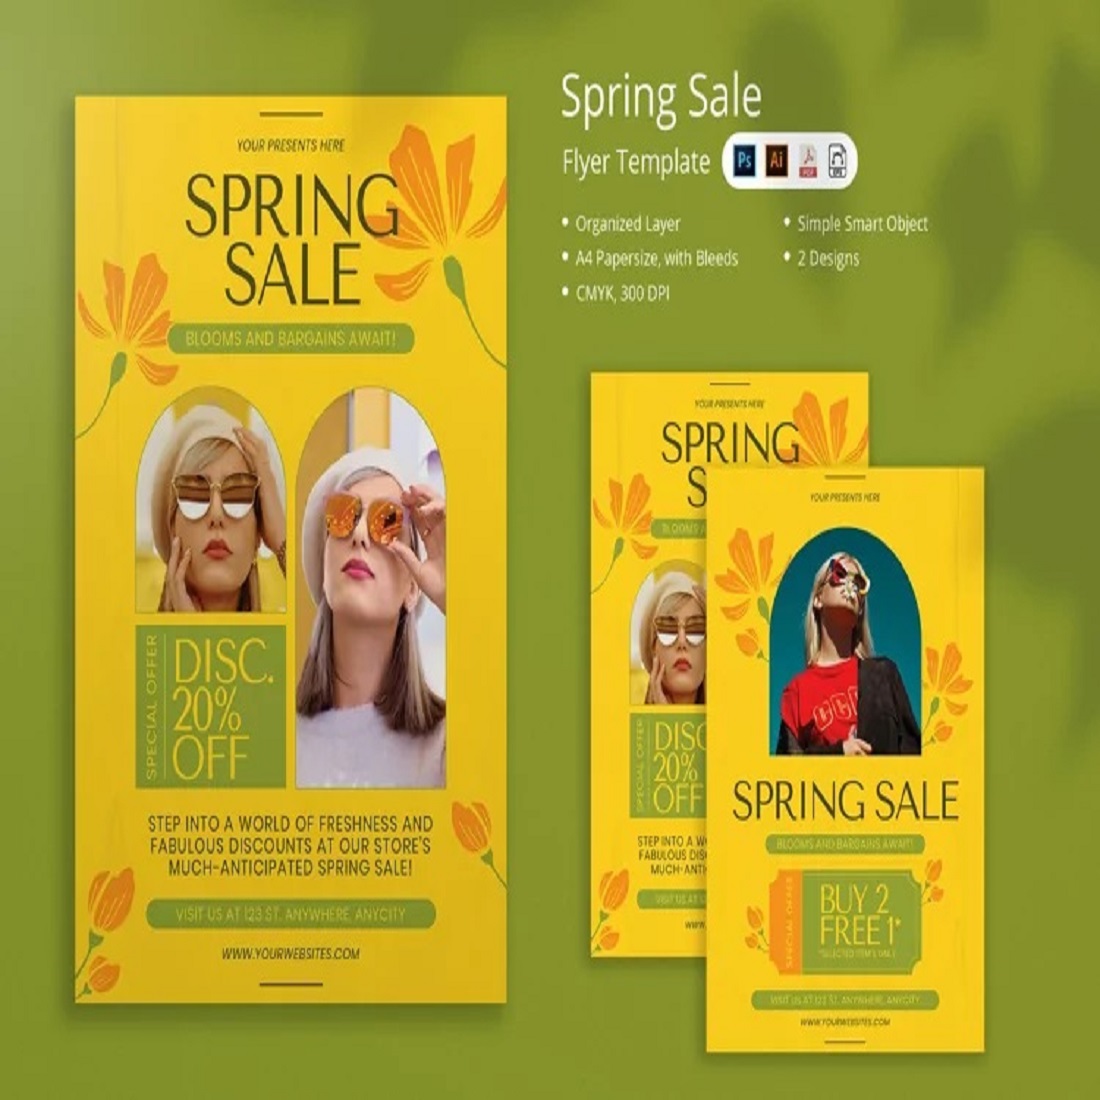 Spring Sale Flyer preview image.